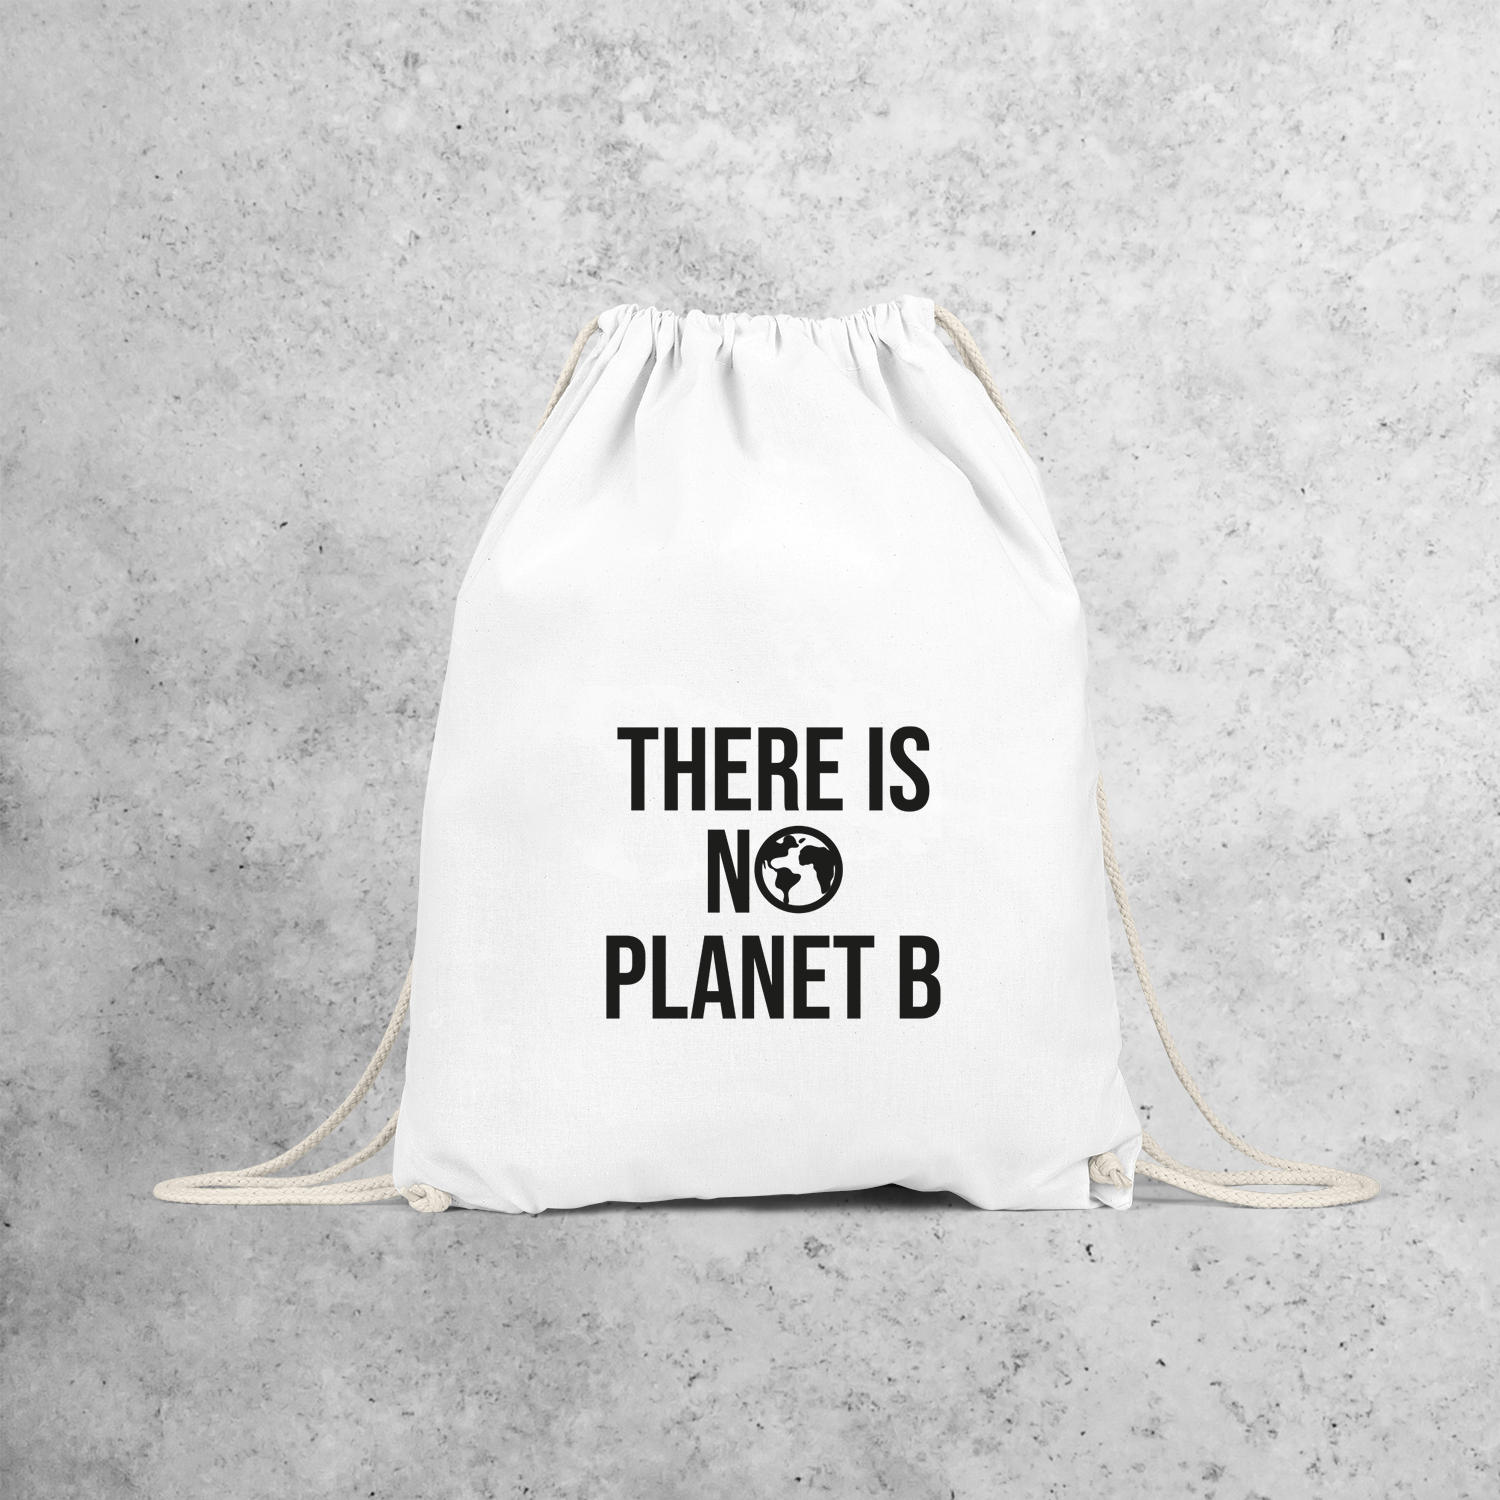 'There is no planet B' backpack